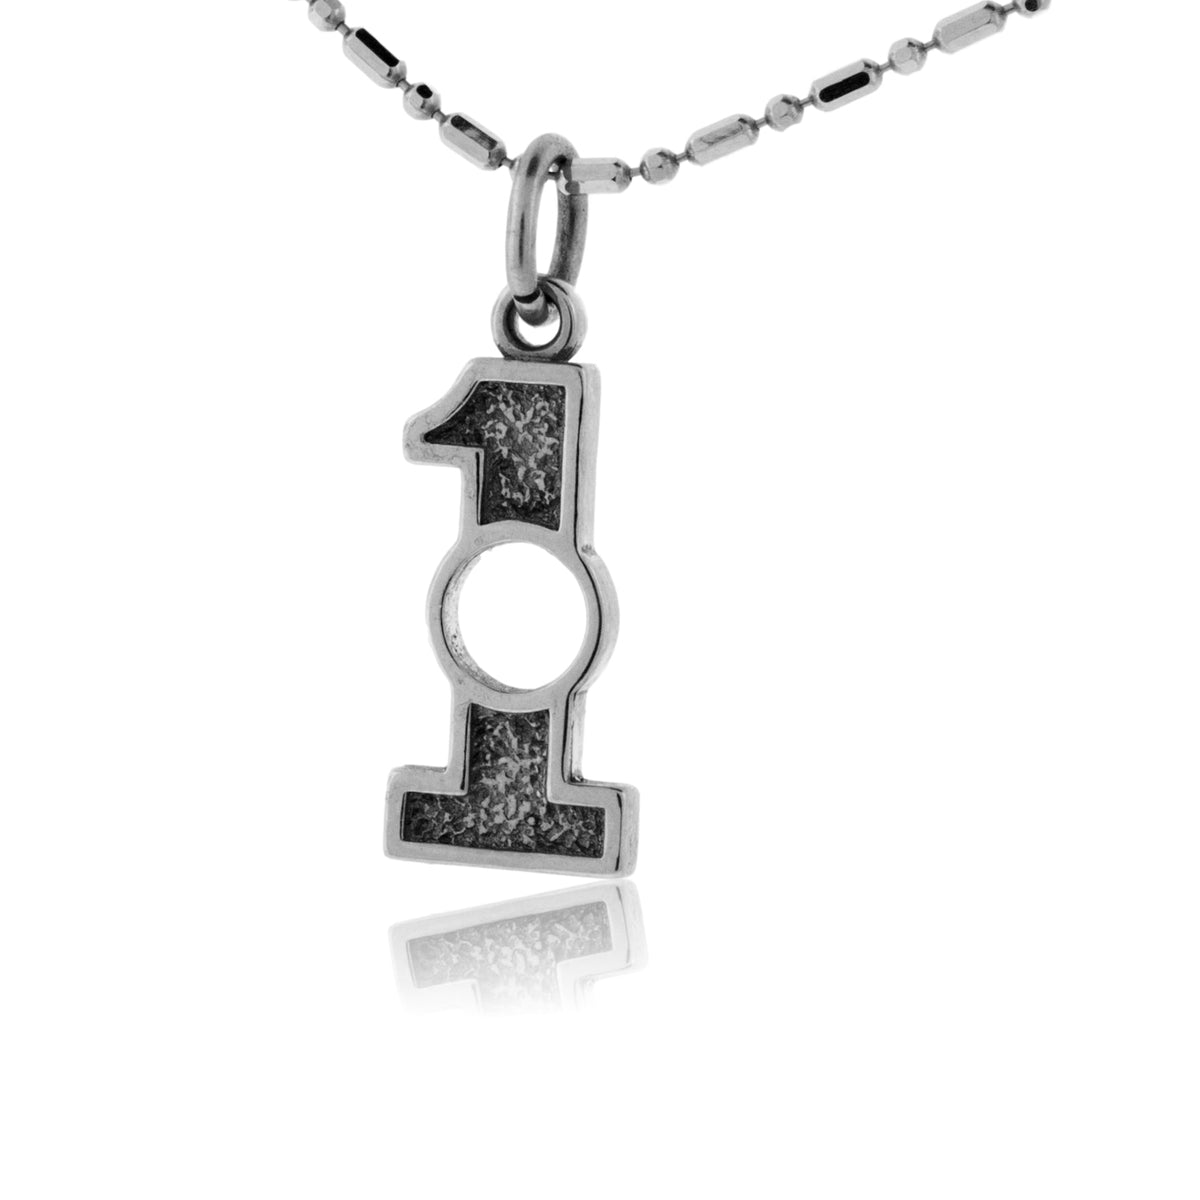 Hole in one necklace/charm